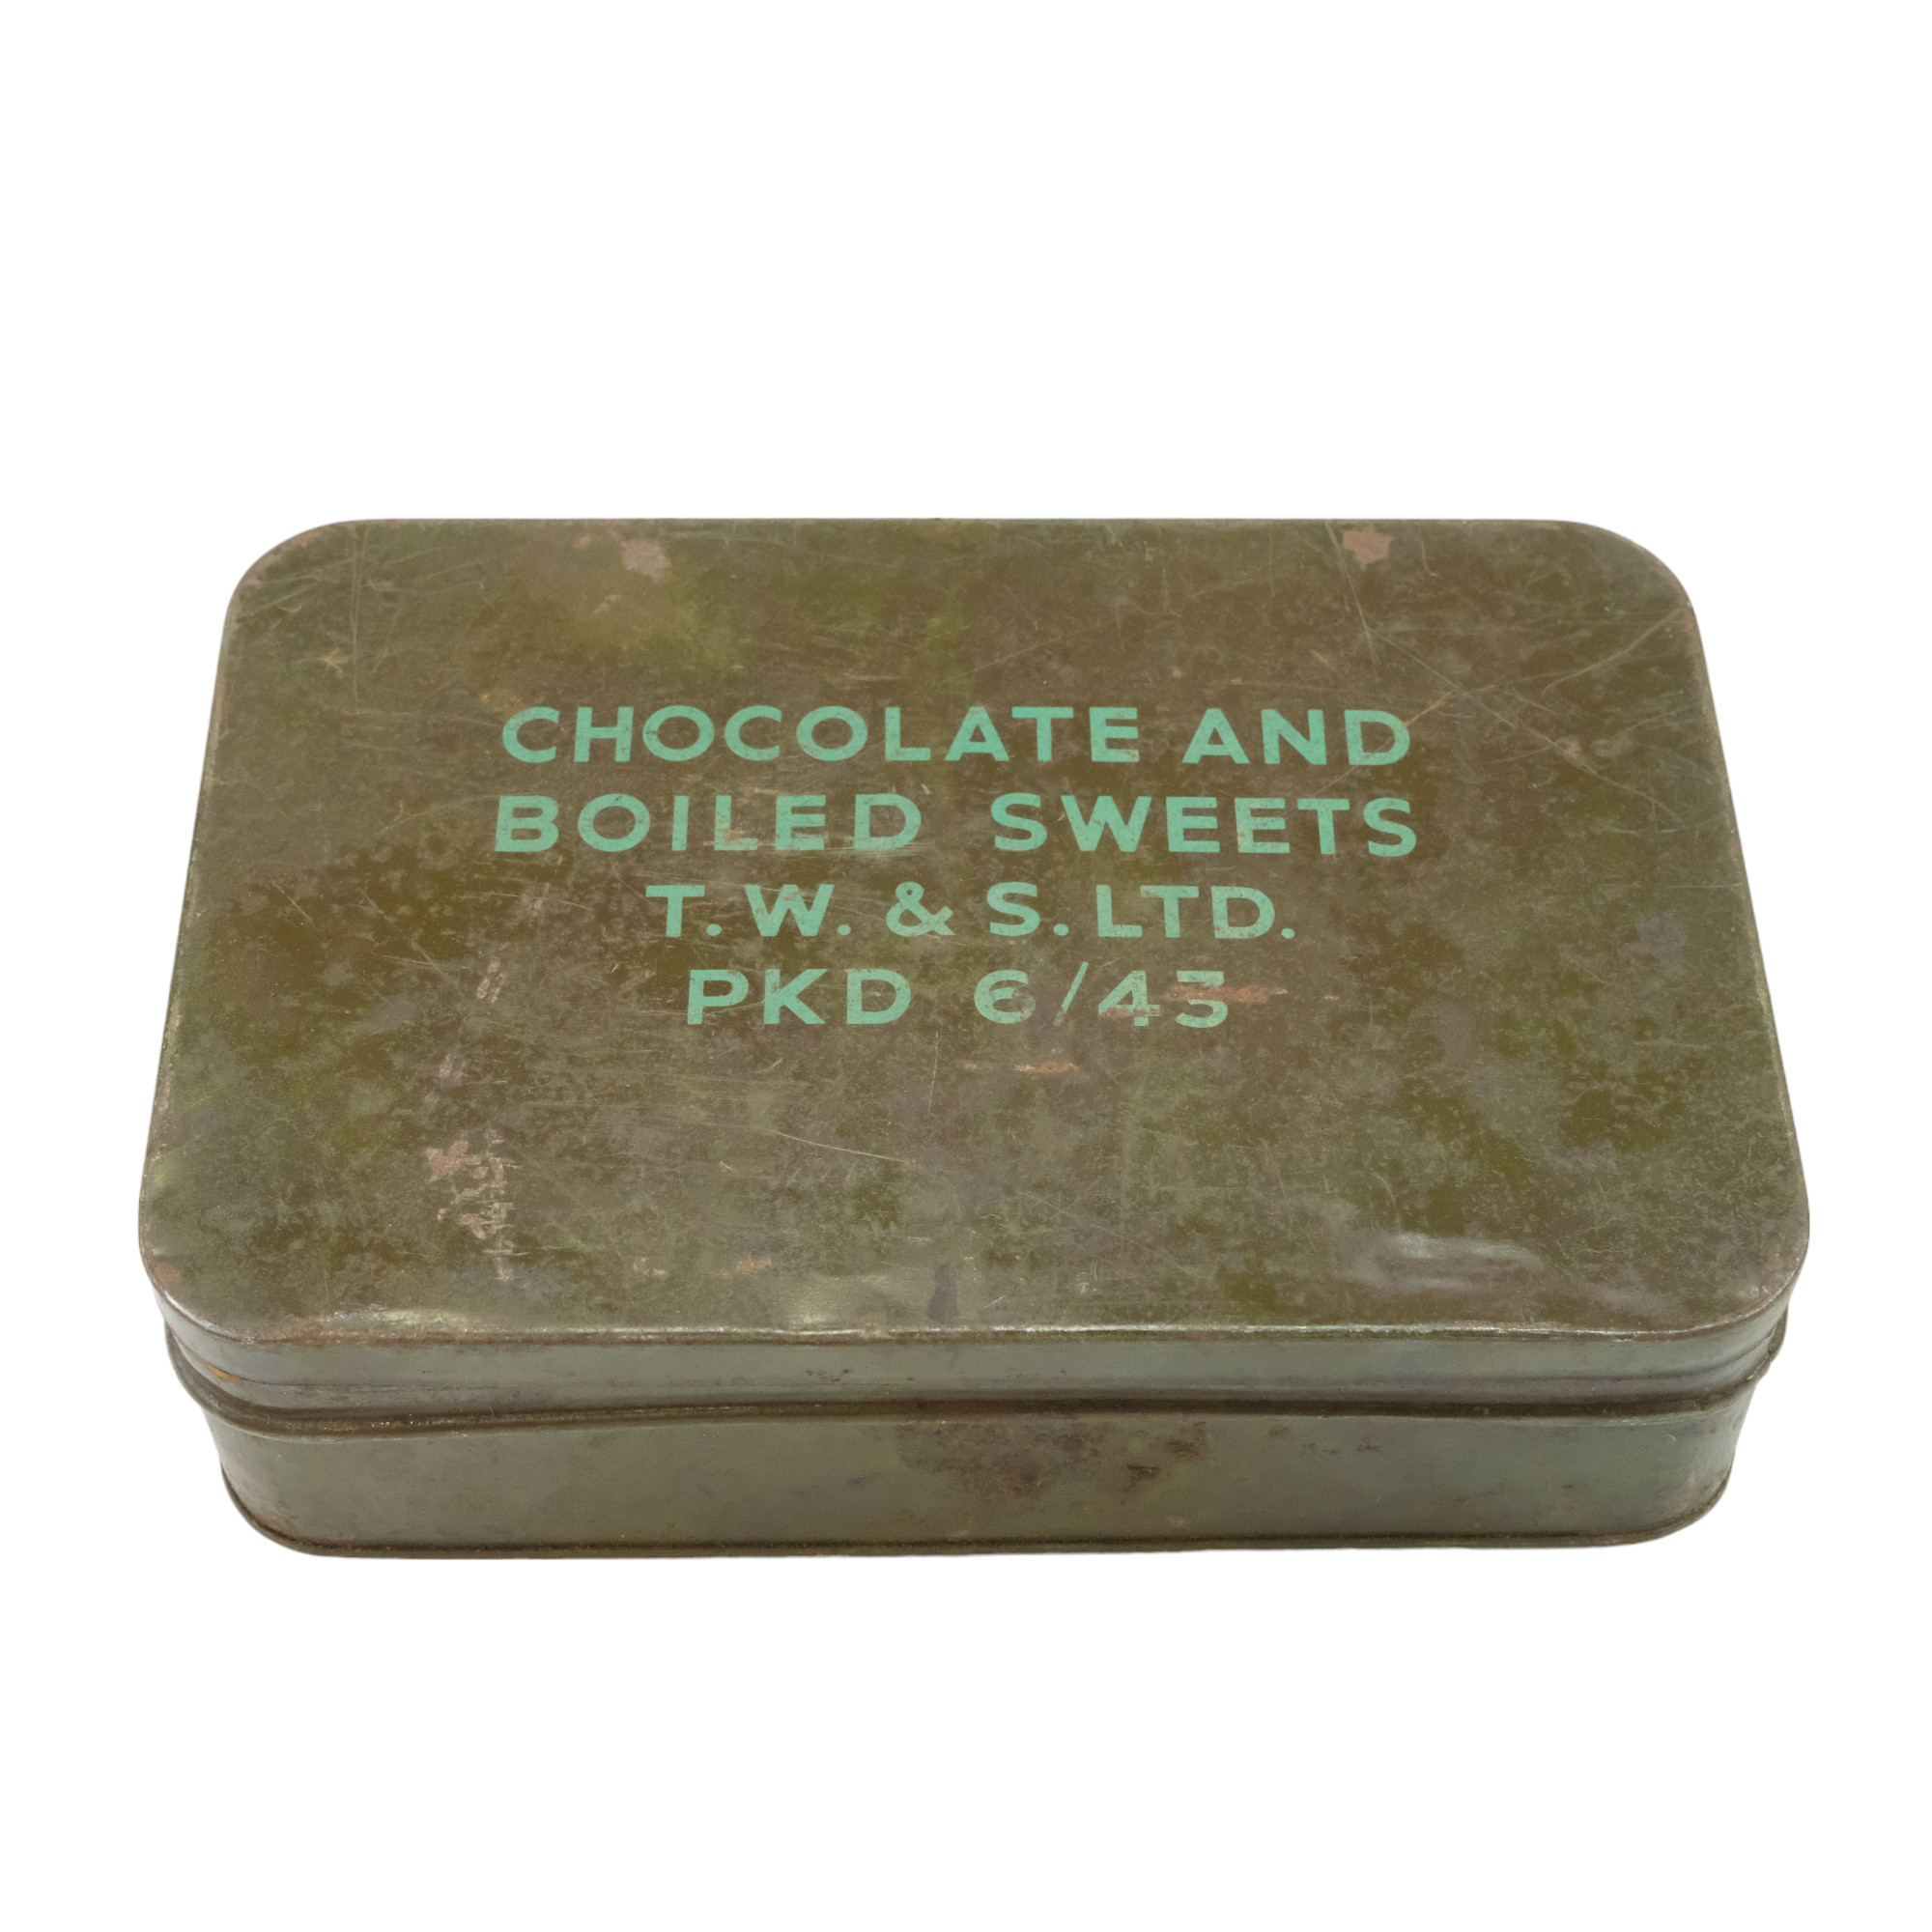 A 1945 British Army Chocolate and Boiled Sweets ration tin